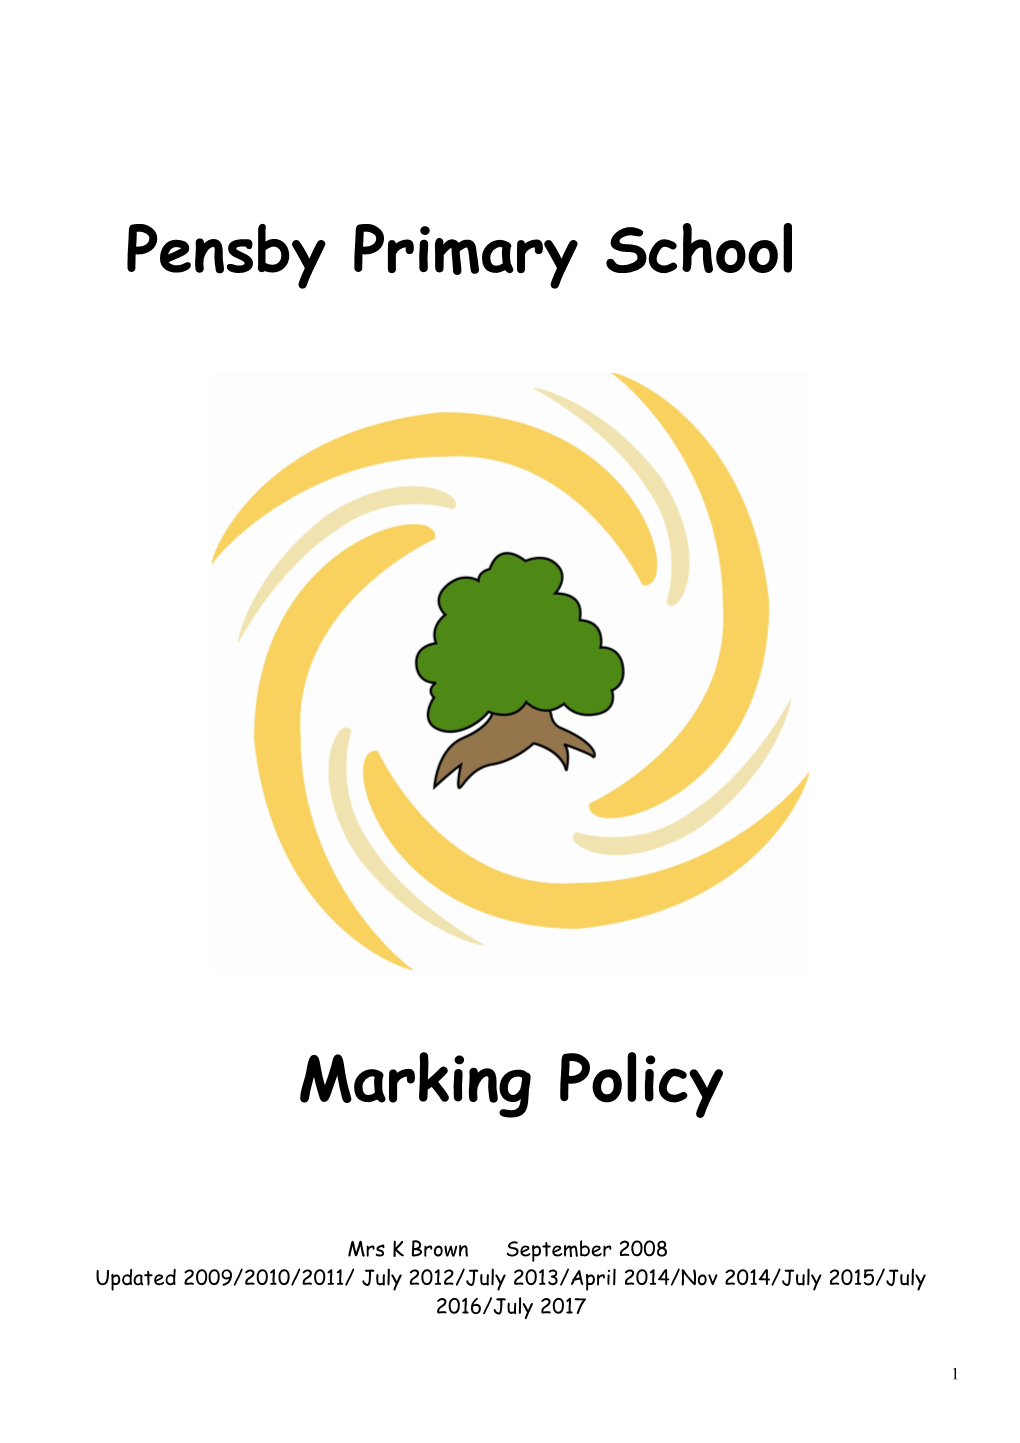 Pensby Primary School